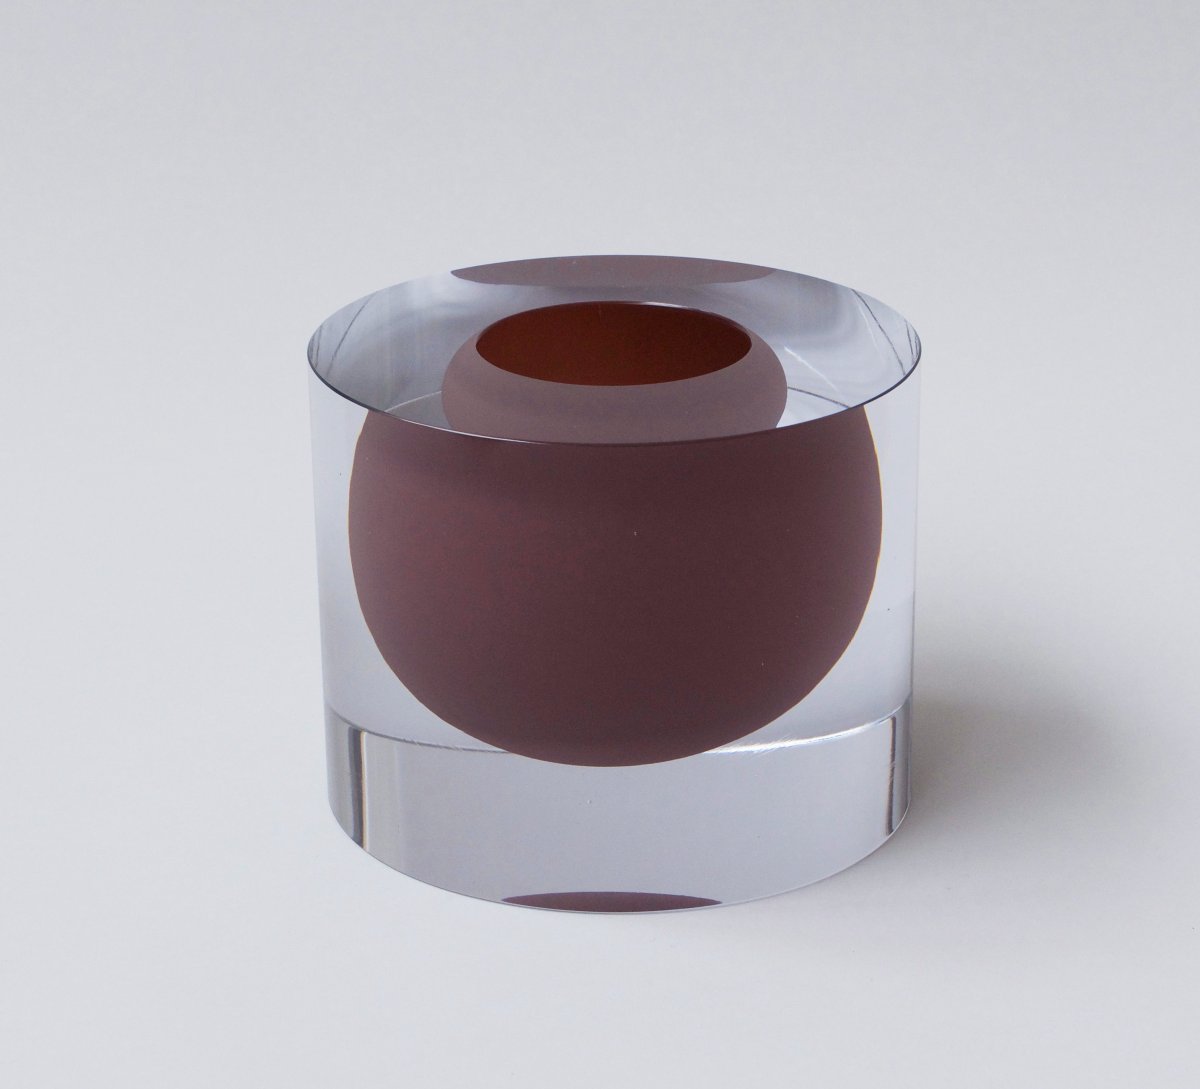 Cylinder with Floating Bowl. Plum